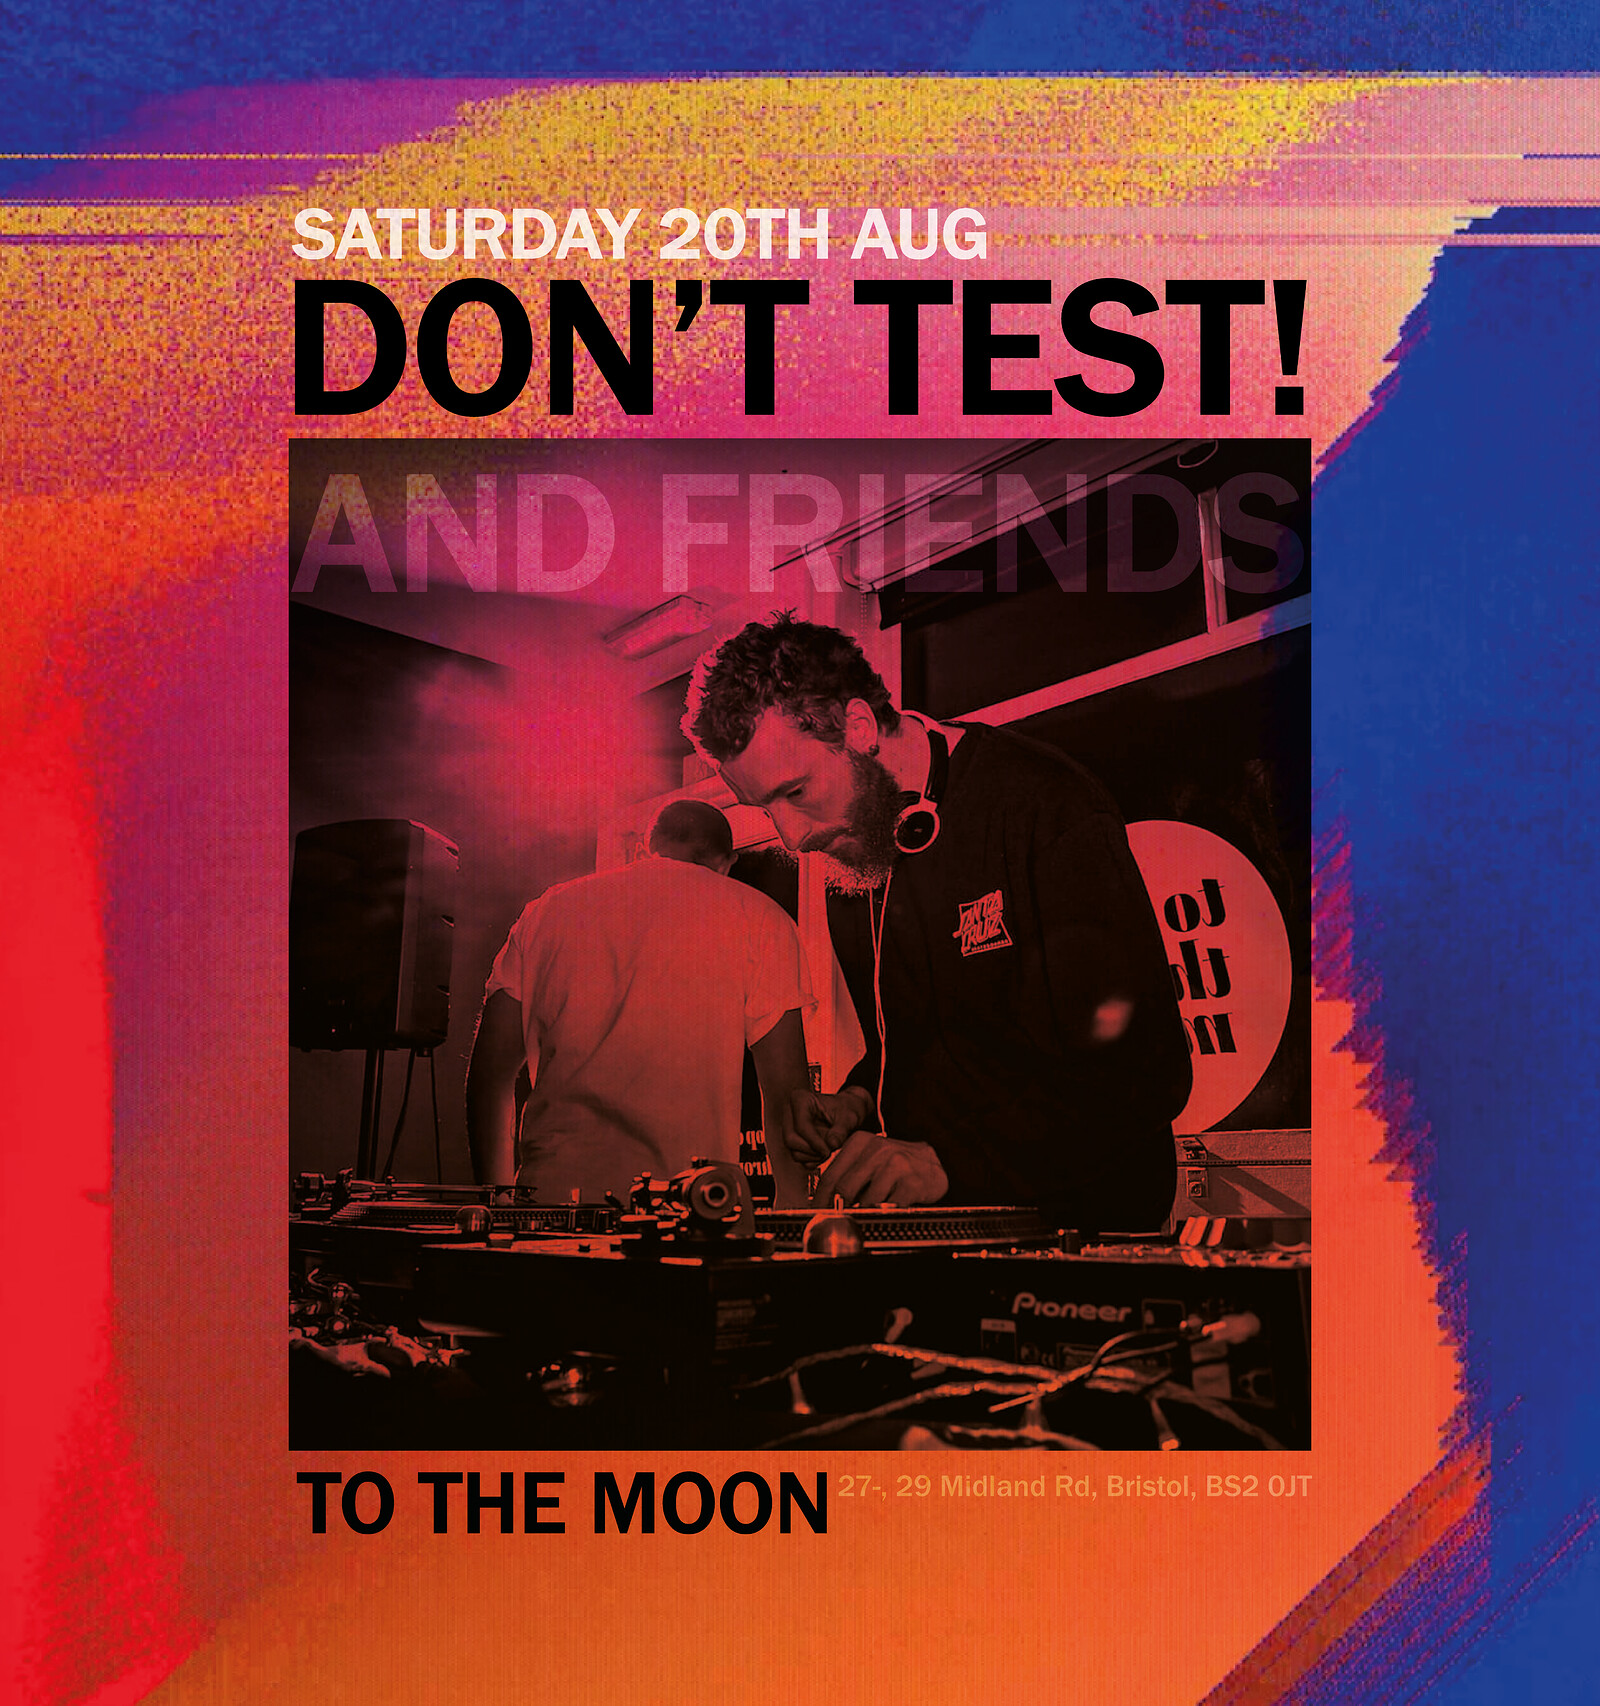 Don't Test And Friends at To The Moon